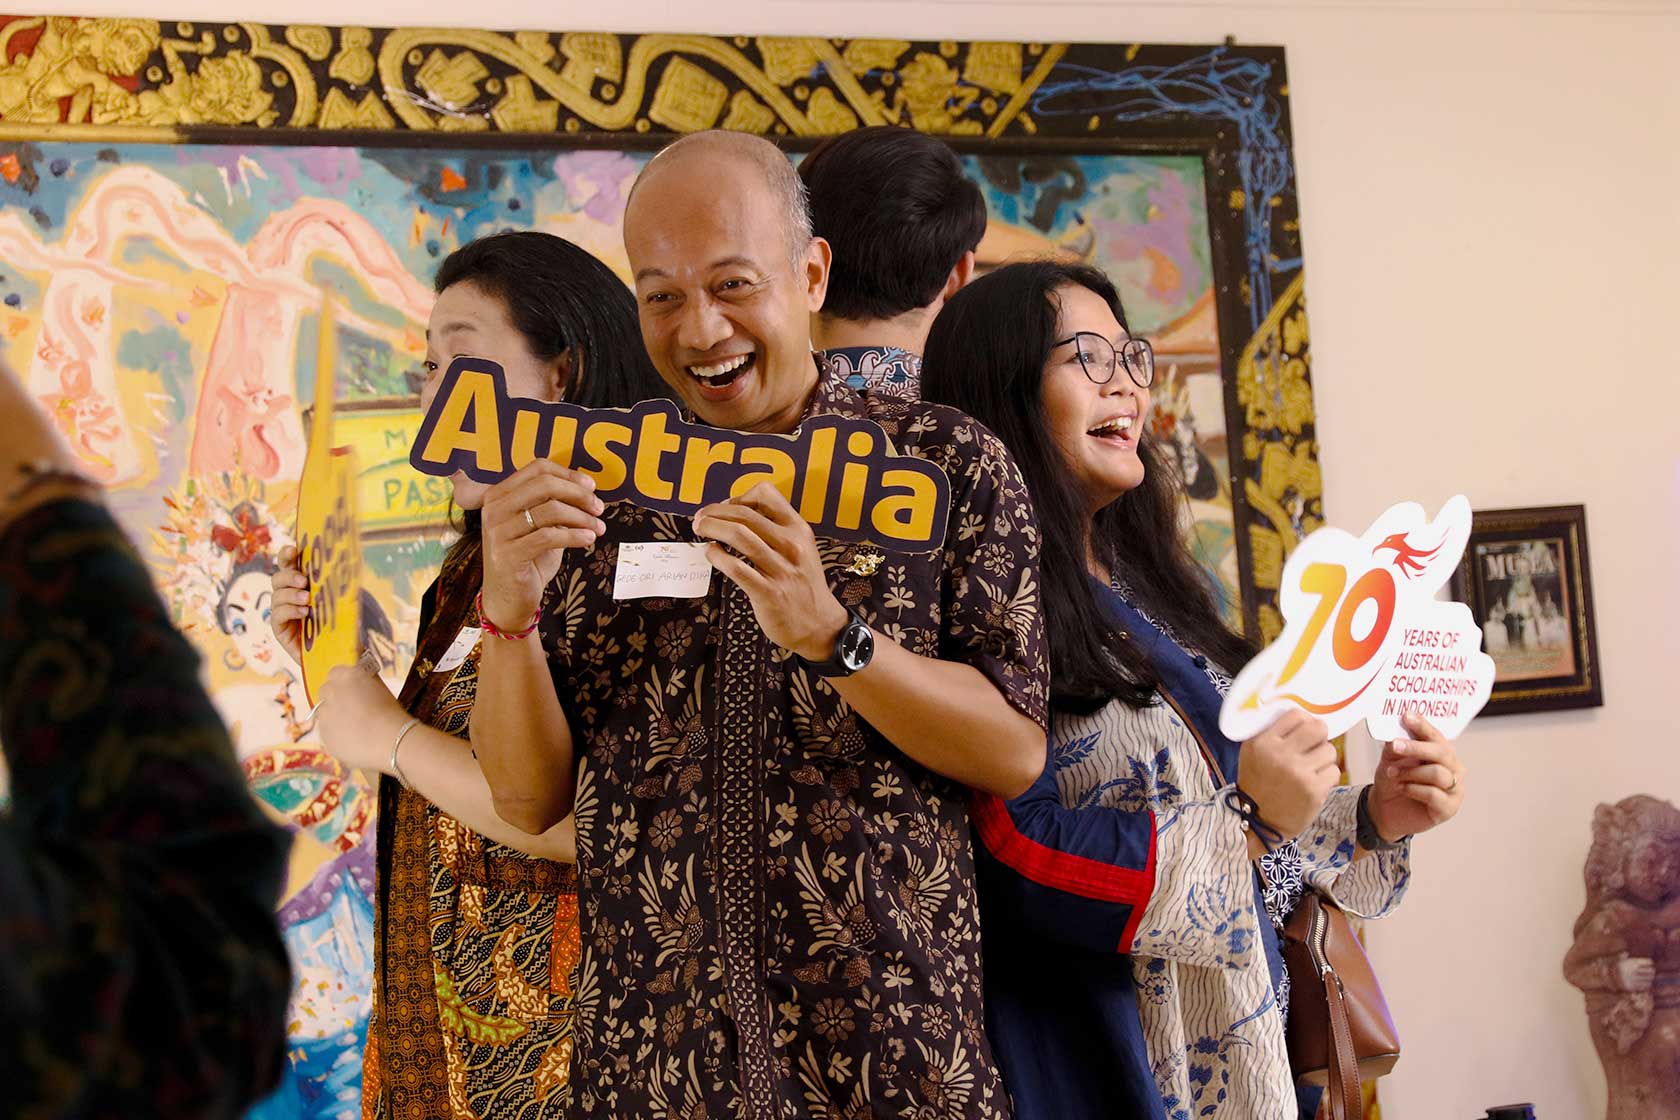 Australian alumni embrace the fun and capture memorable snaps at the photo booth.